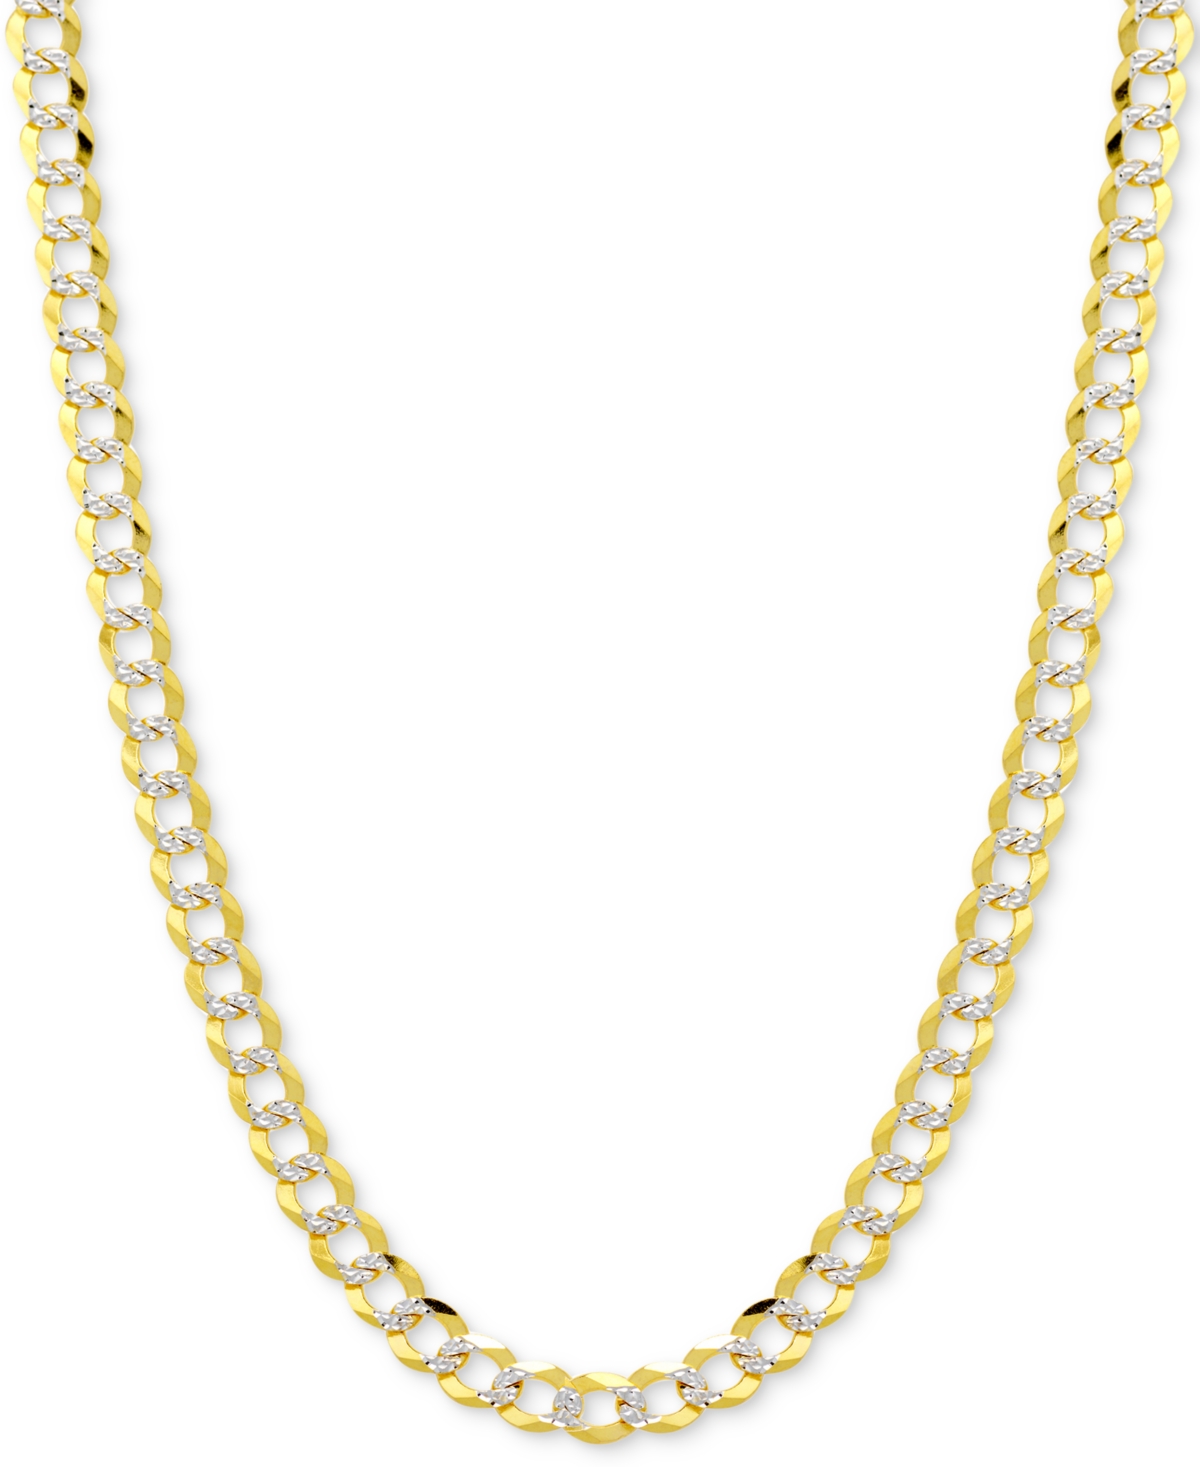 26" Two-Tone Open Curb Chain Necklace in Solid 14k Gold & White Gold - Two-Tone